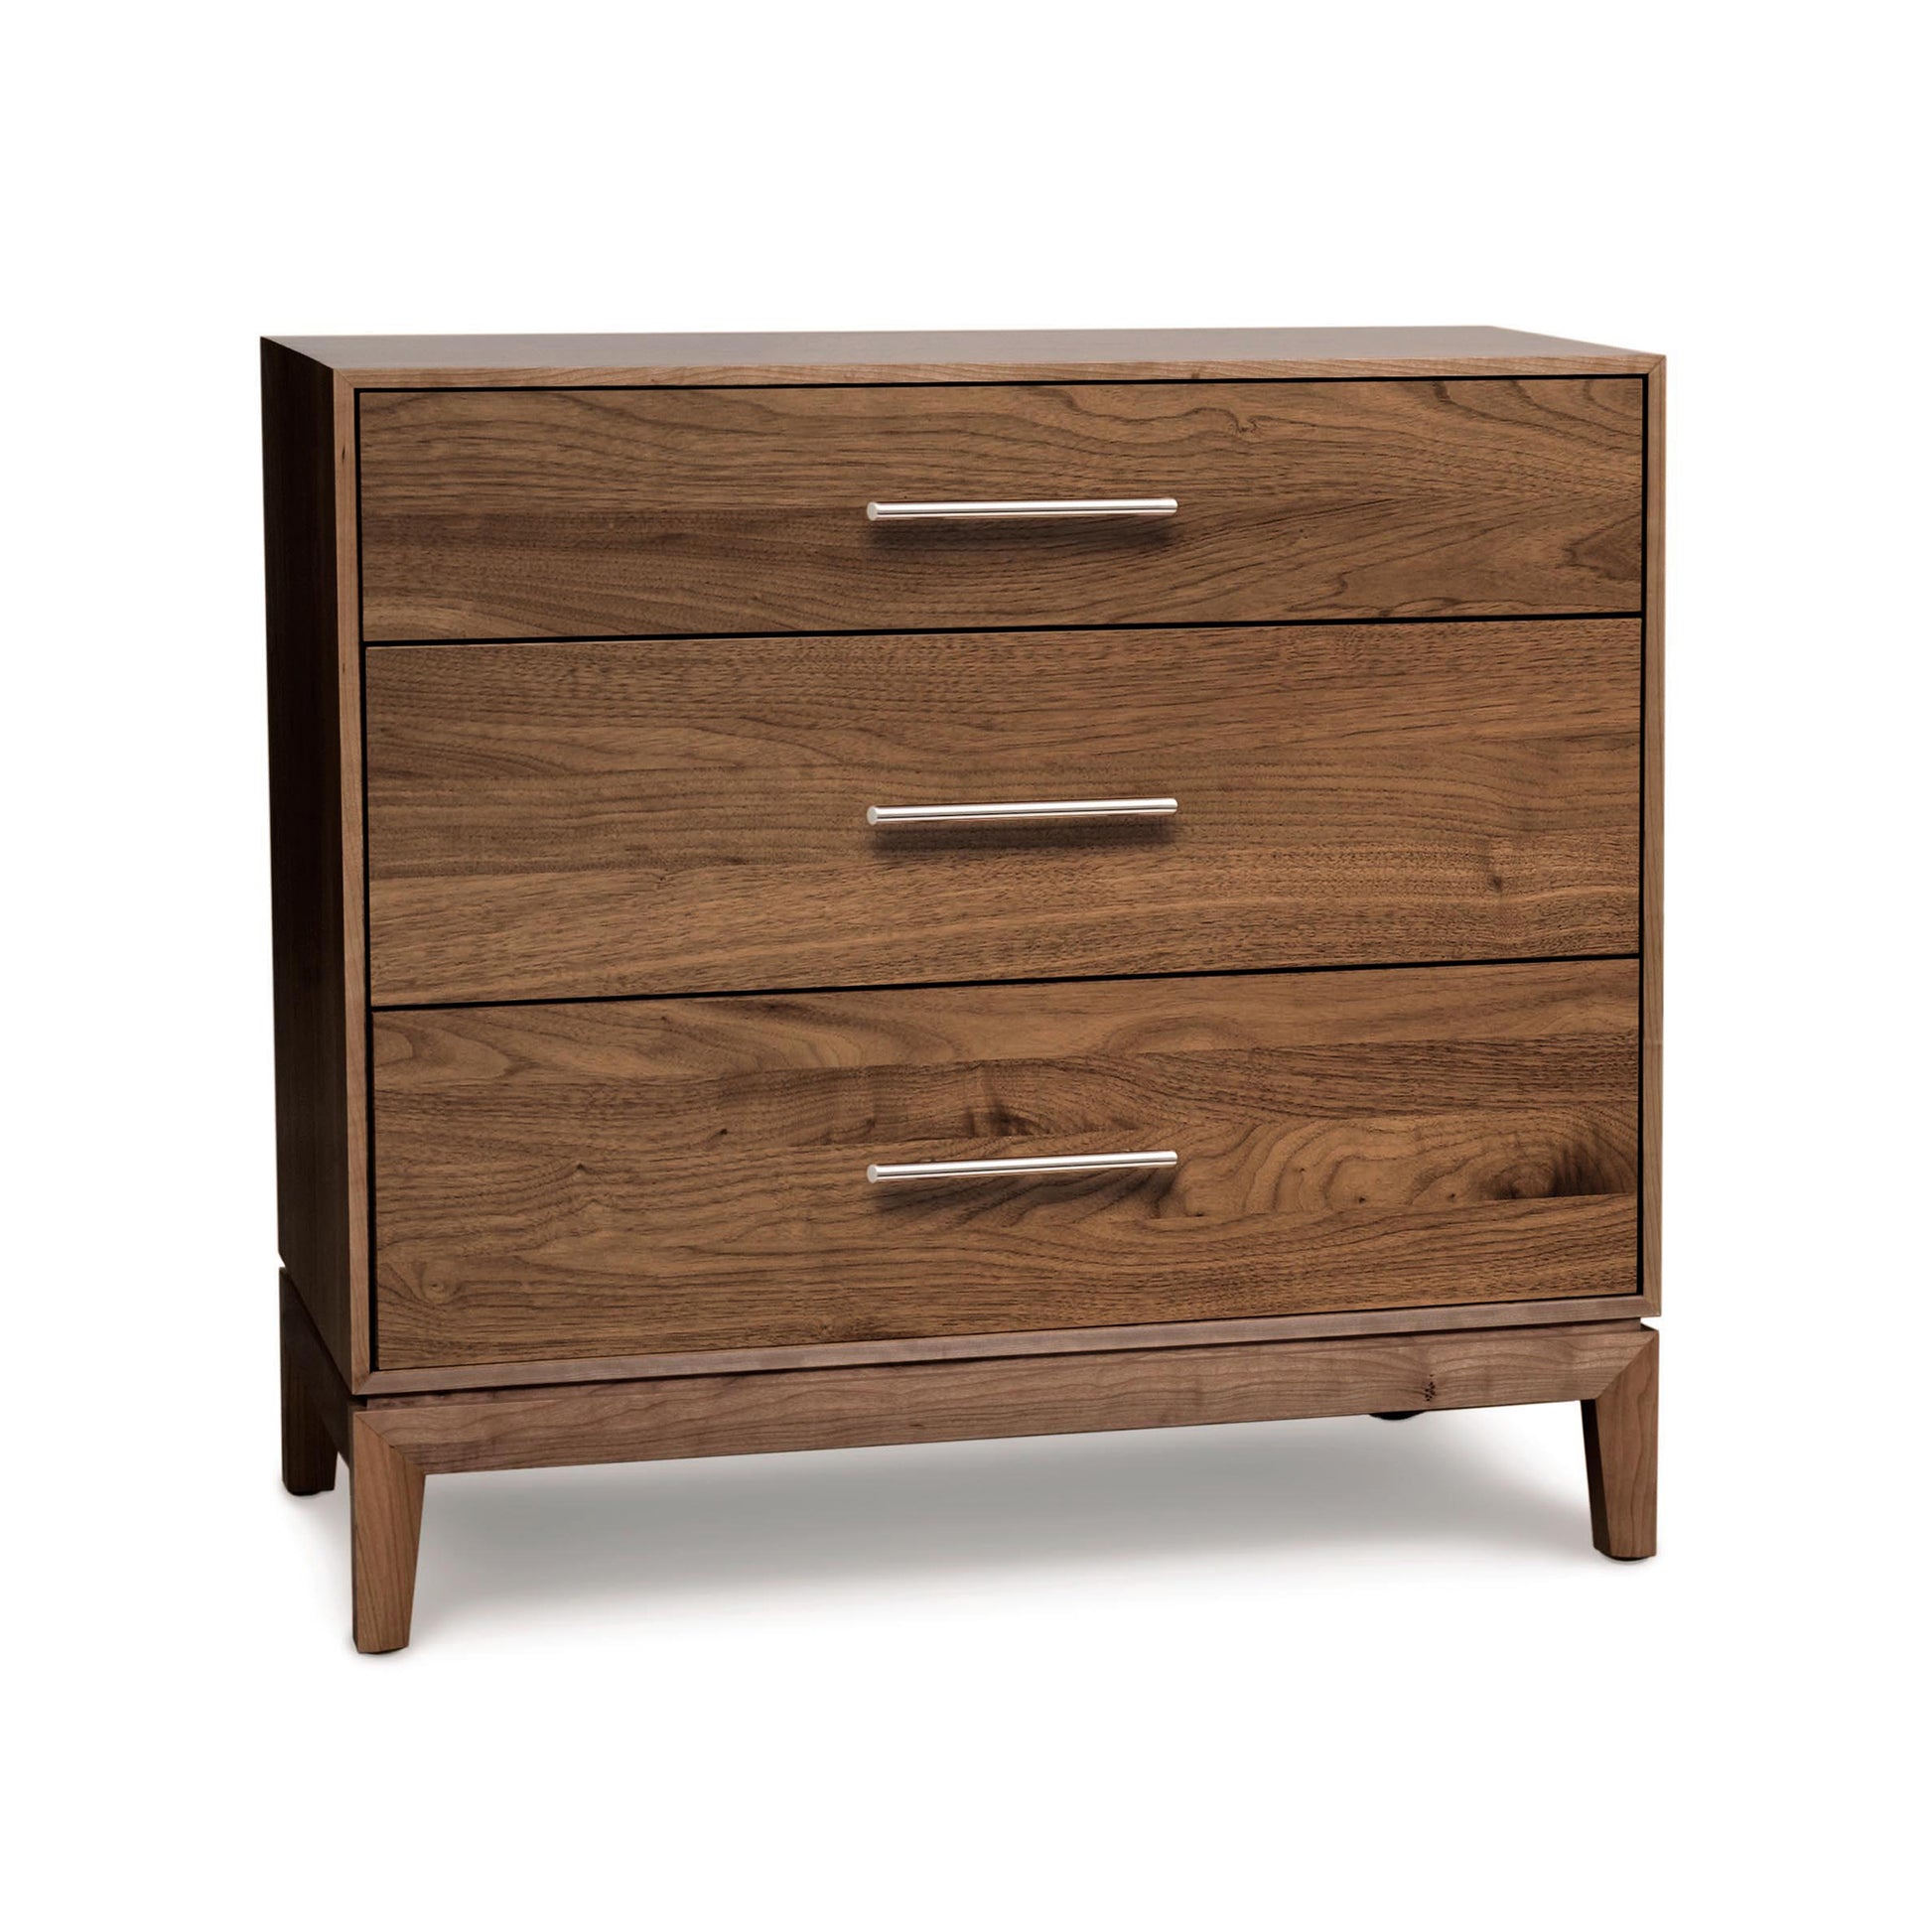 An Arts and Crafts style Mansfield 3-Drawer Chest by Copeland Furniture with metal handles on a white background.